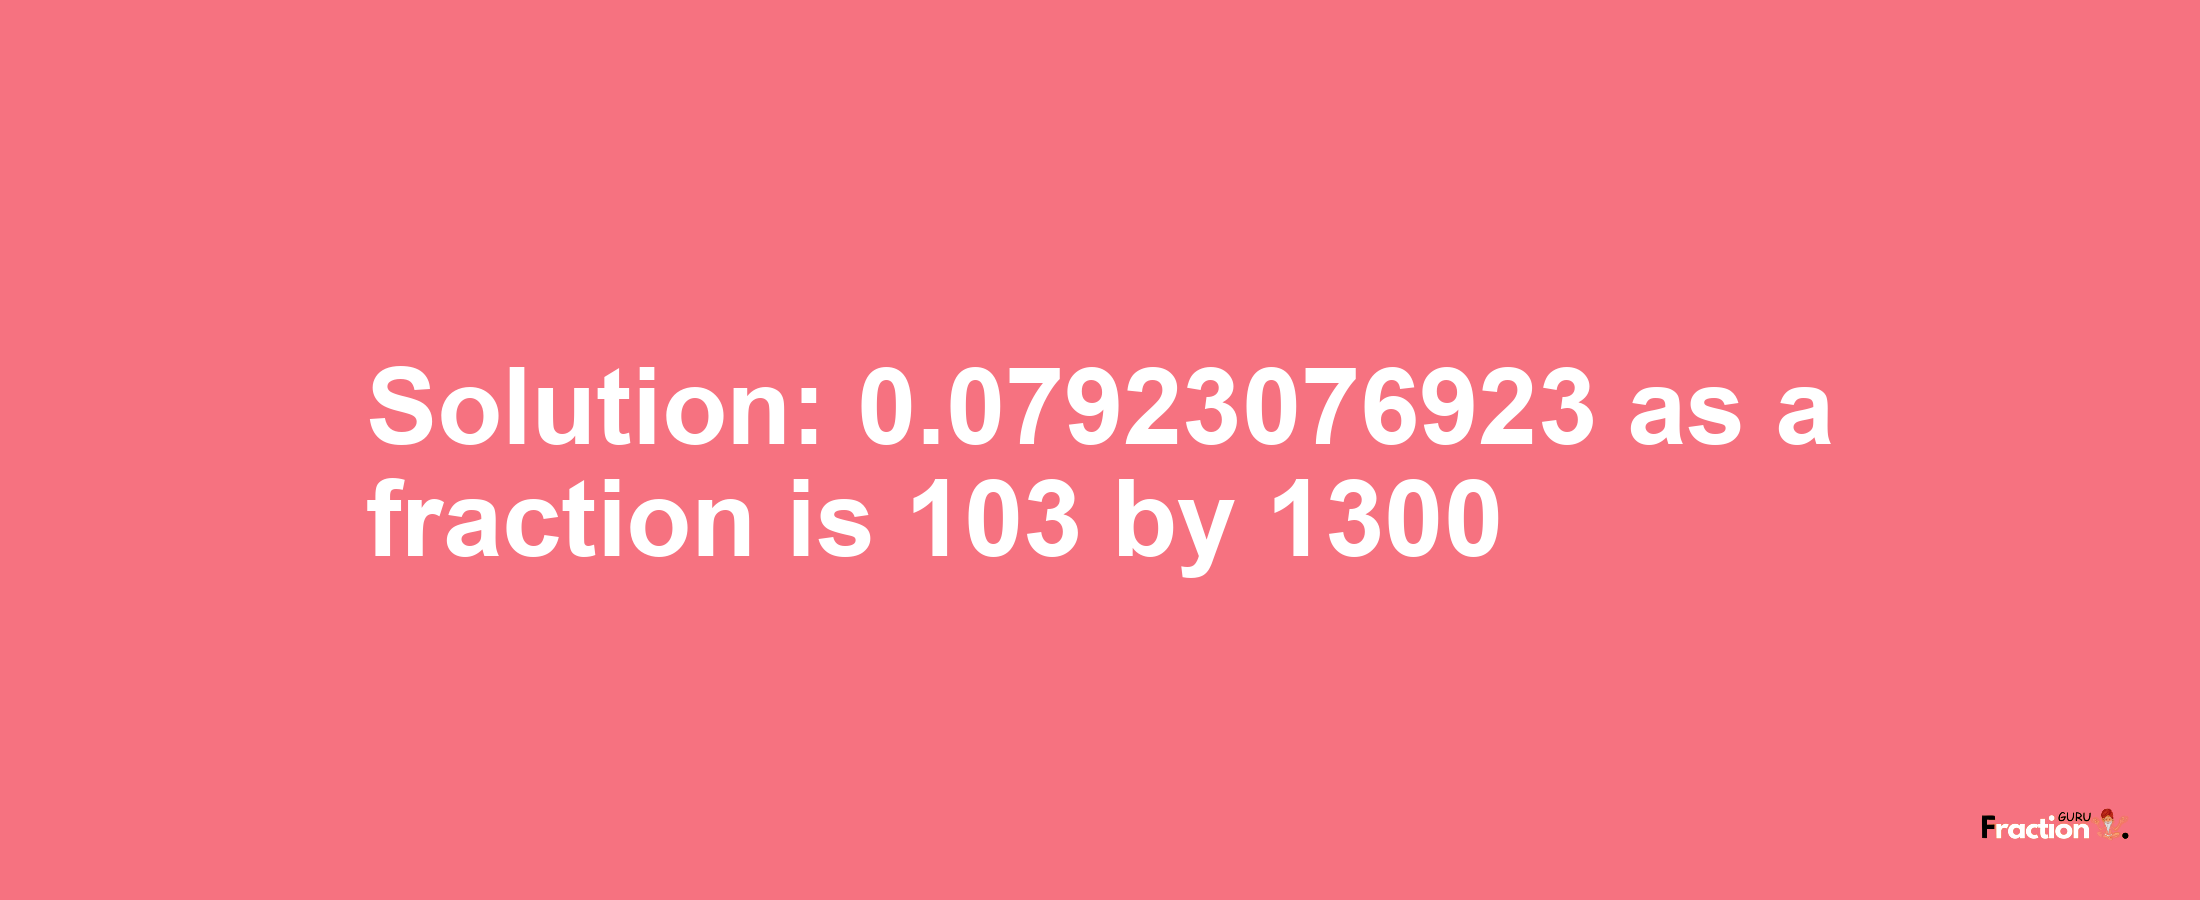 Solution:0.07923076923 as a fraction is 103/1300